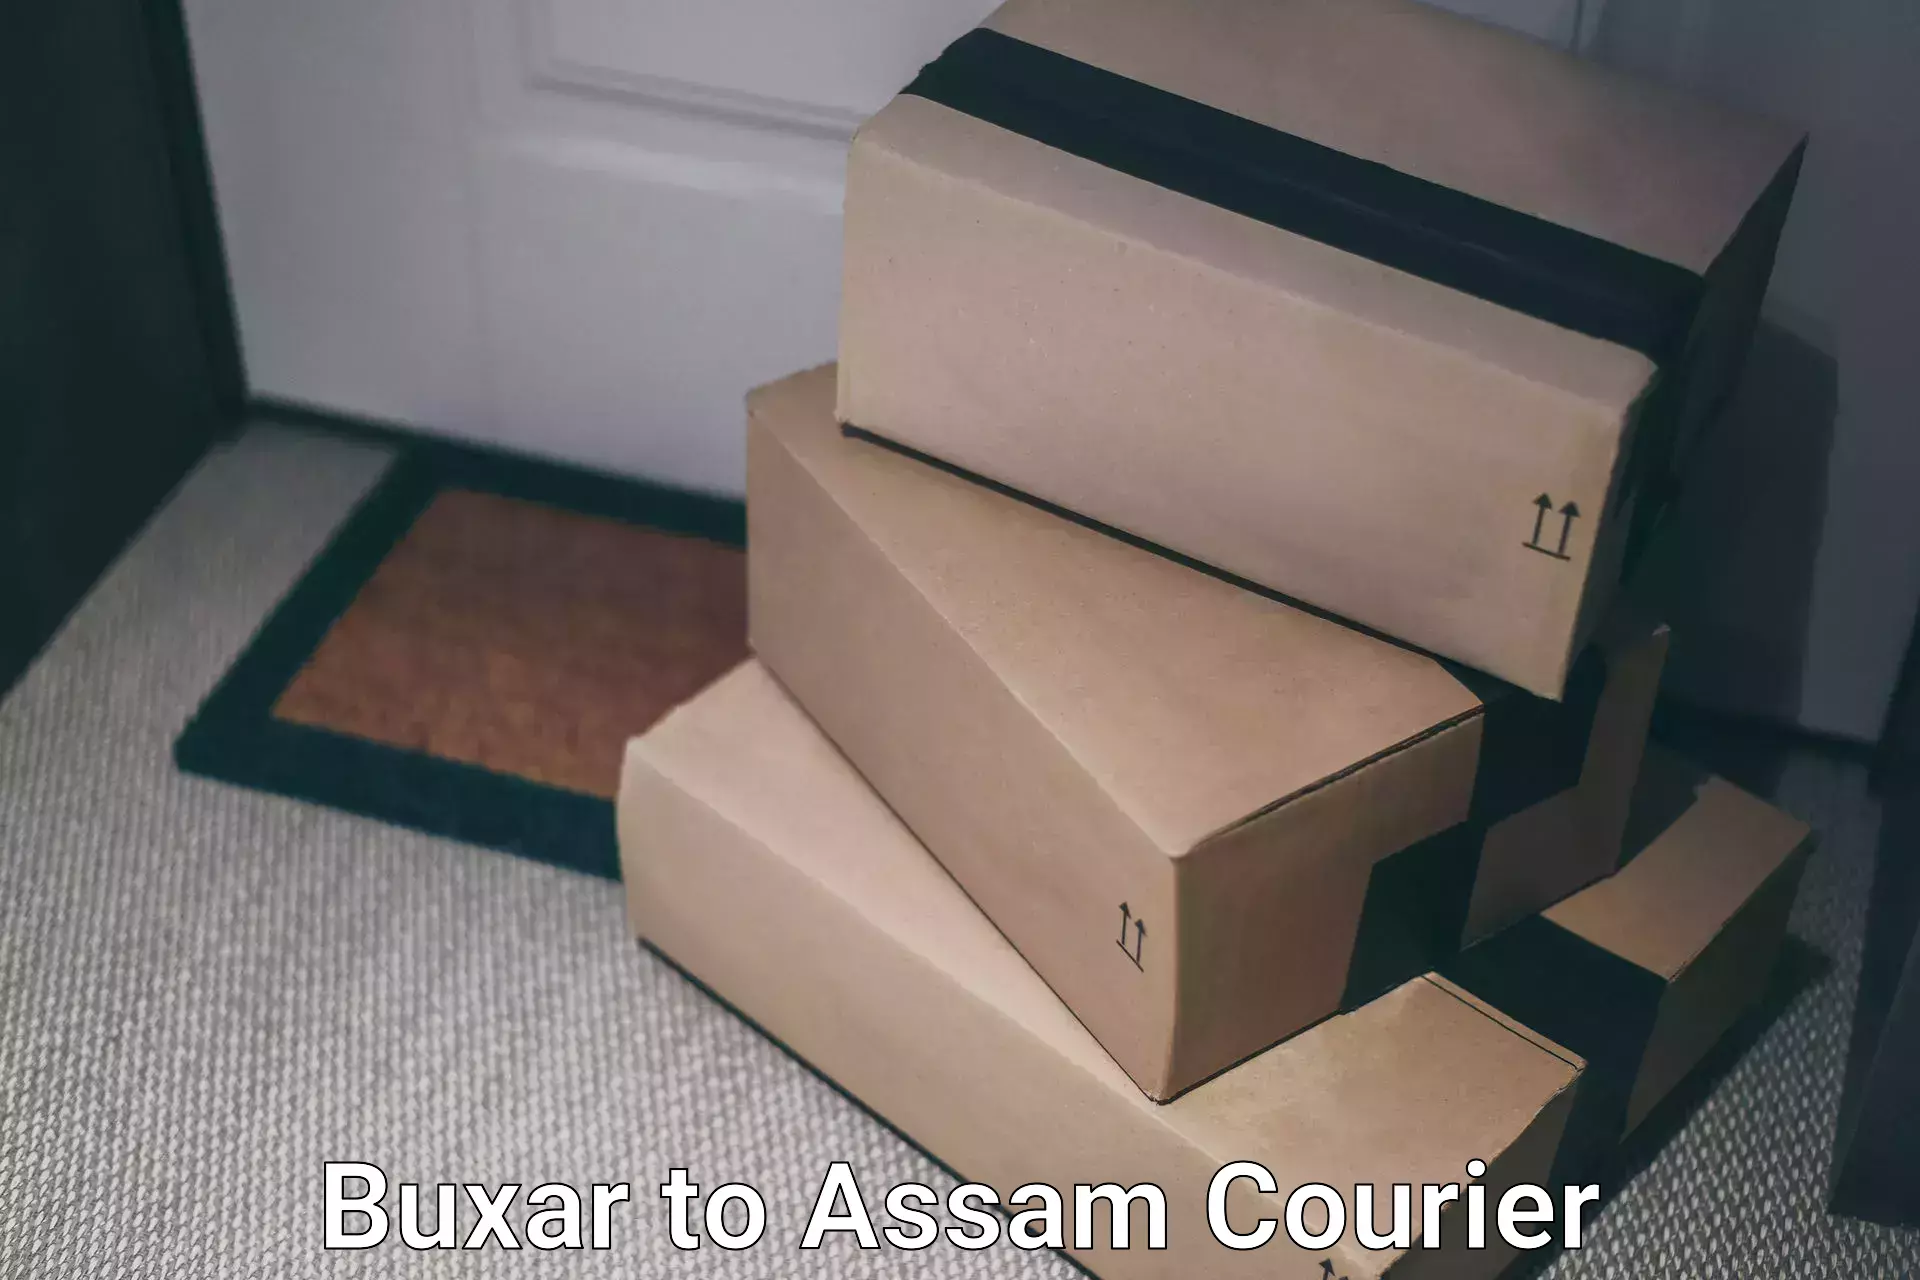 Subscription-based courier Buxar to Assam